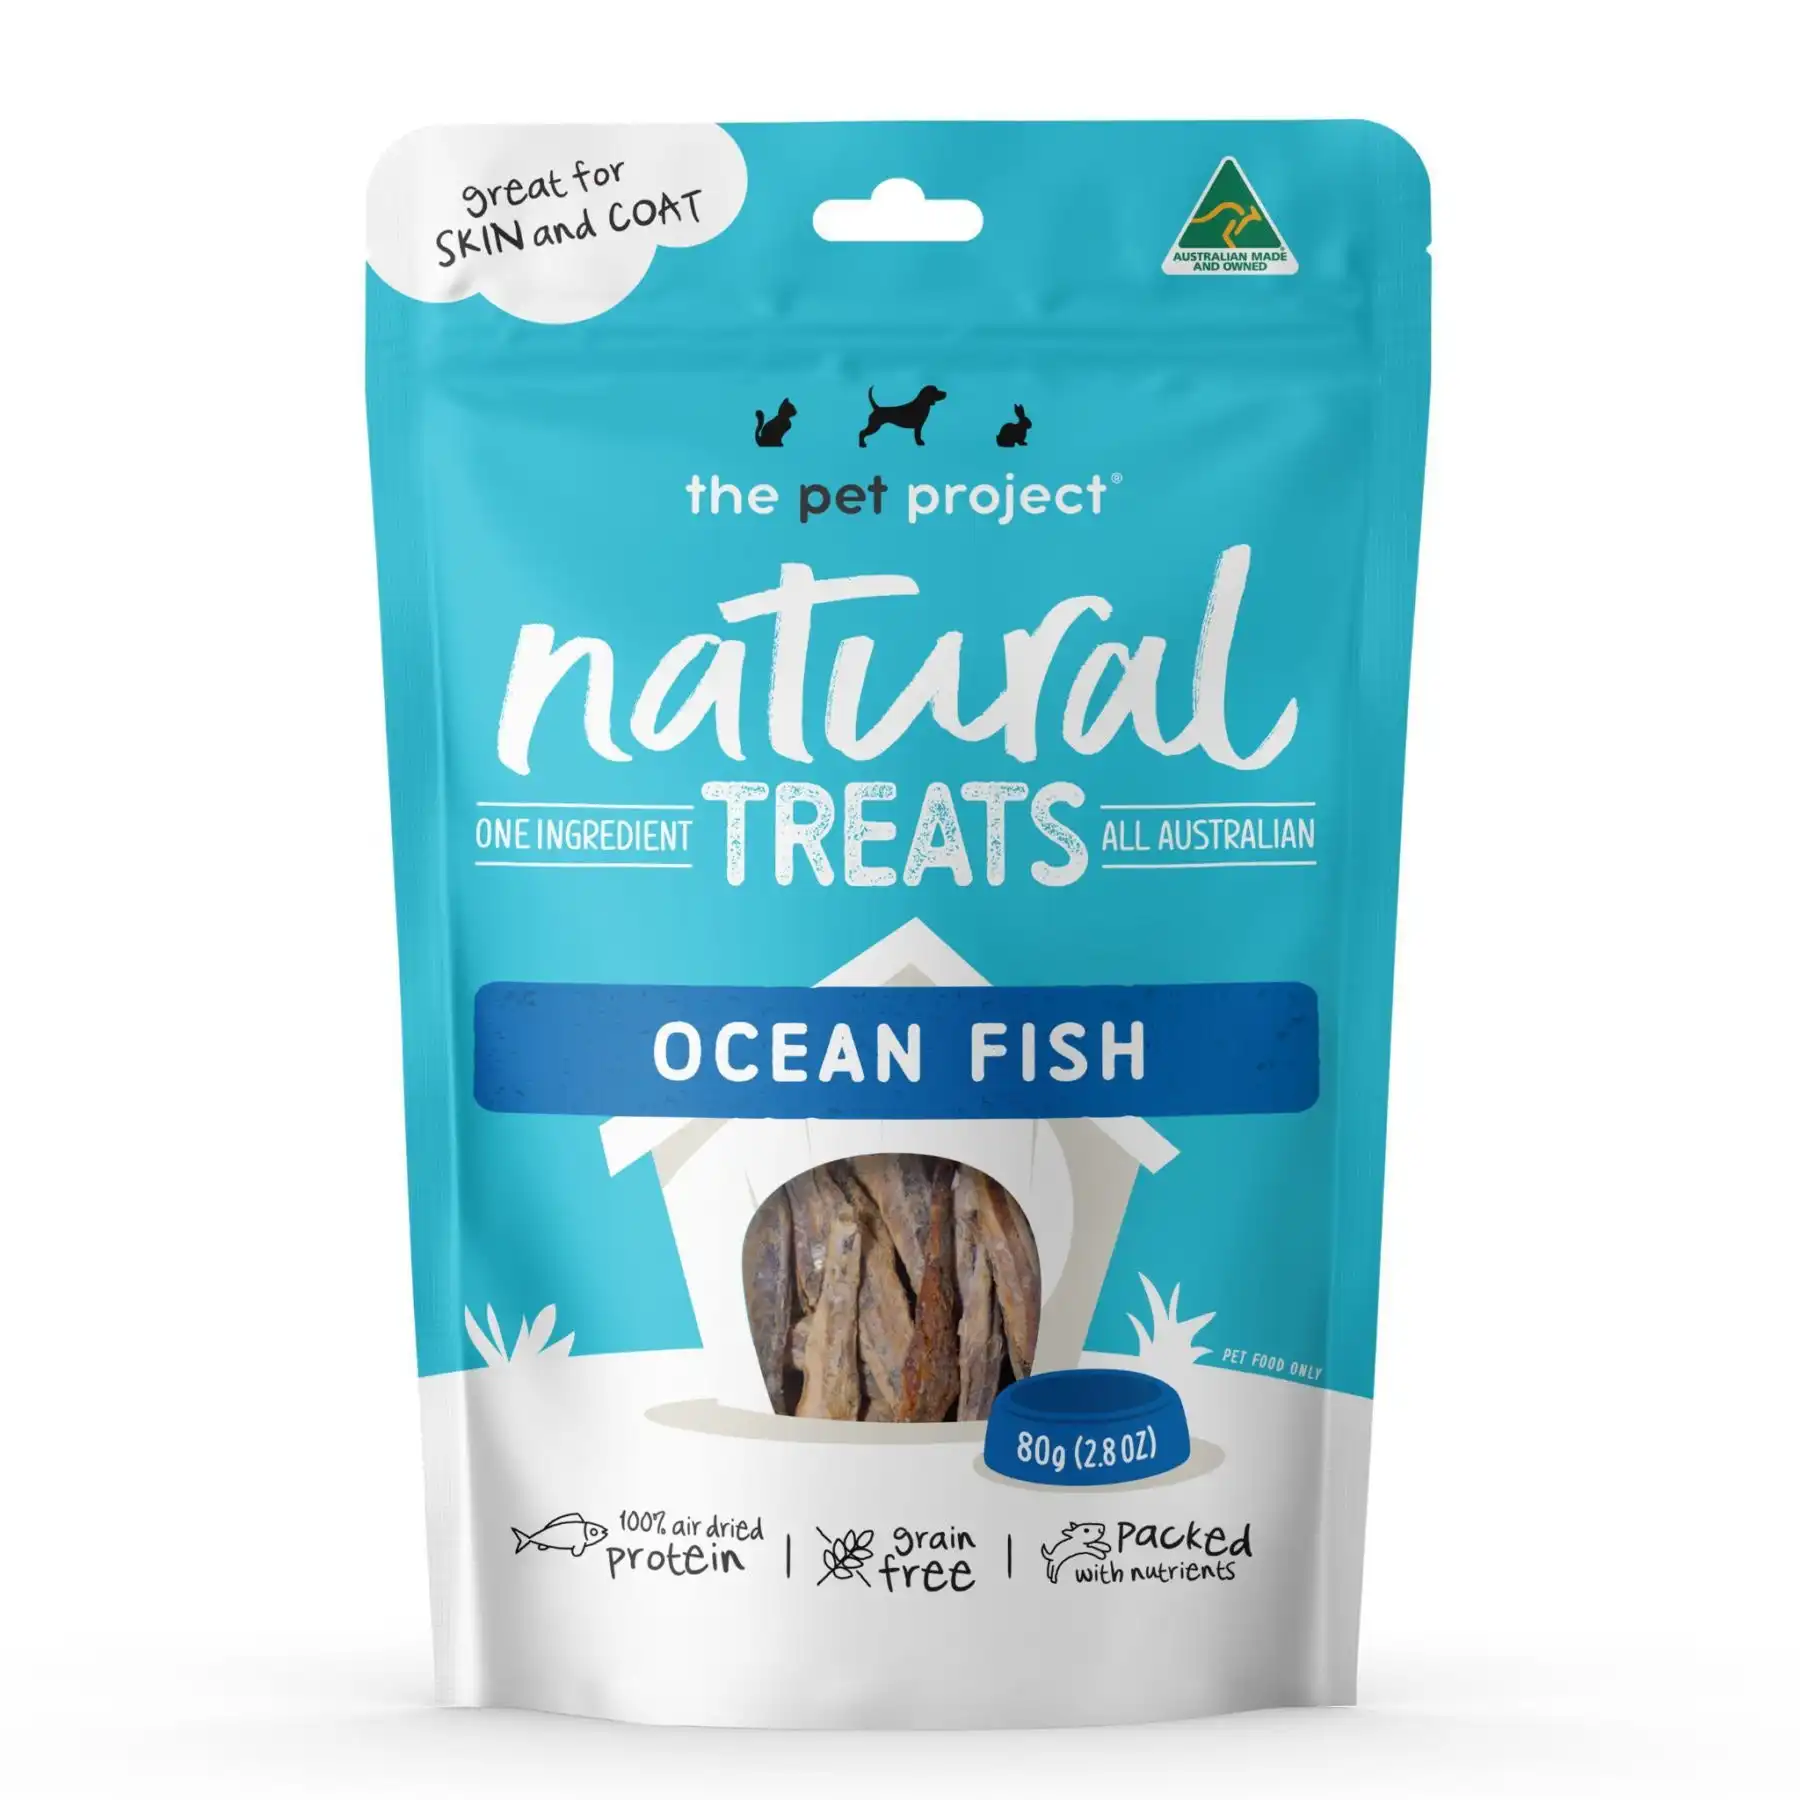 The Pet Project Ocean Fish Treats For Dogs - 80g